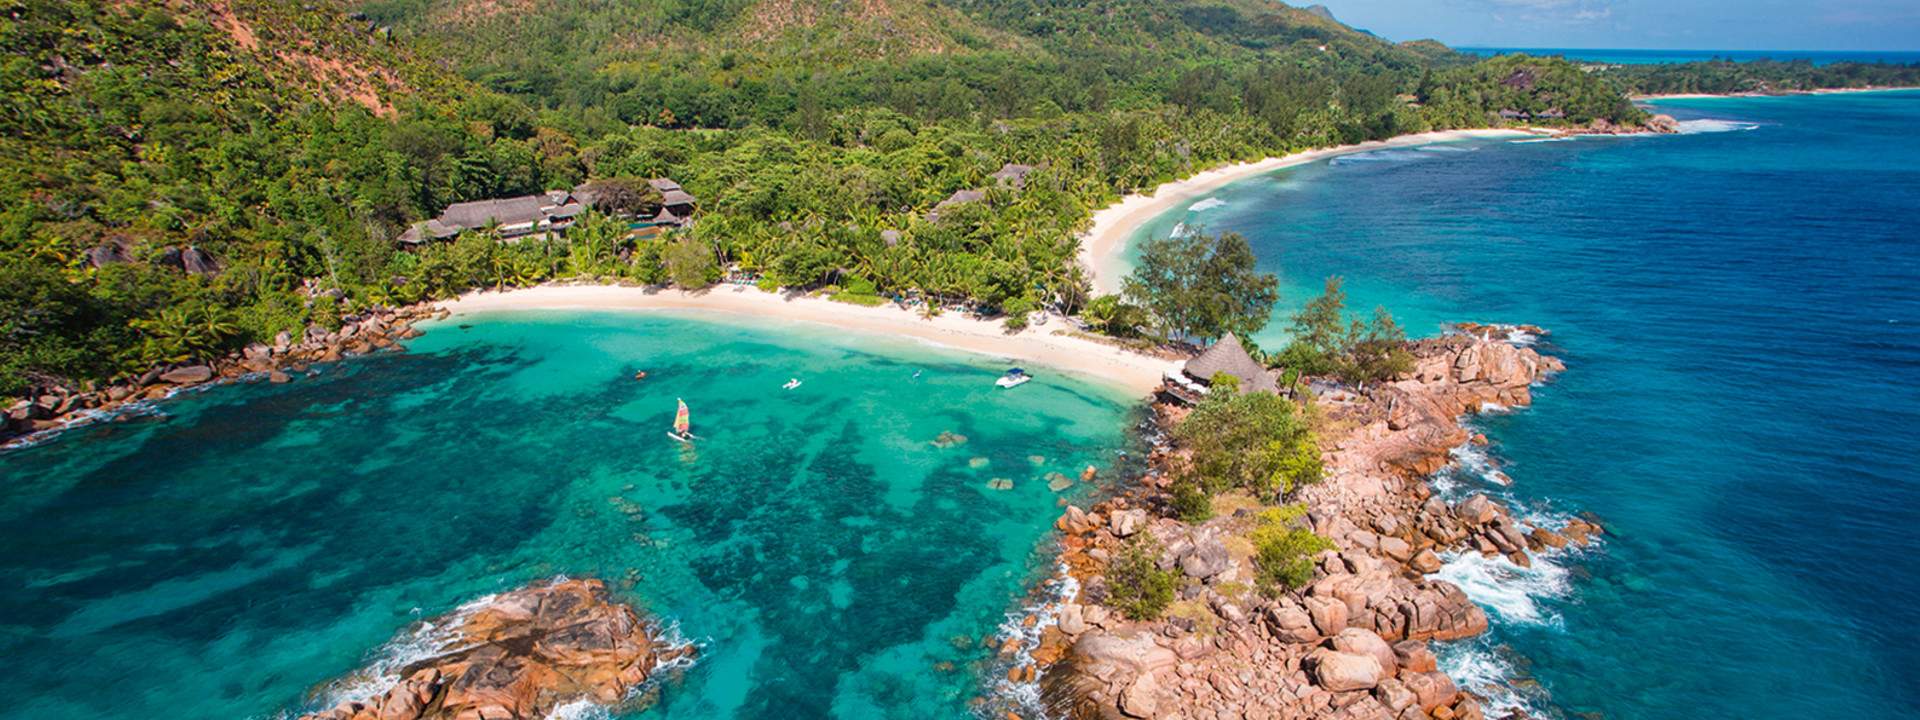 From tropical forests to the seabed, explore the Seychelles